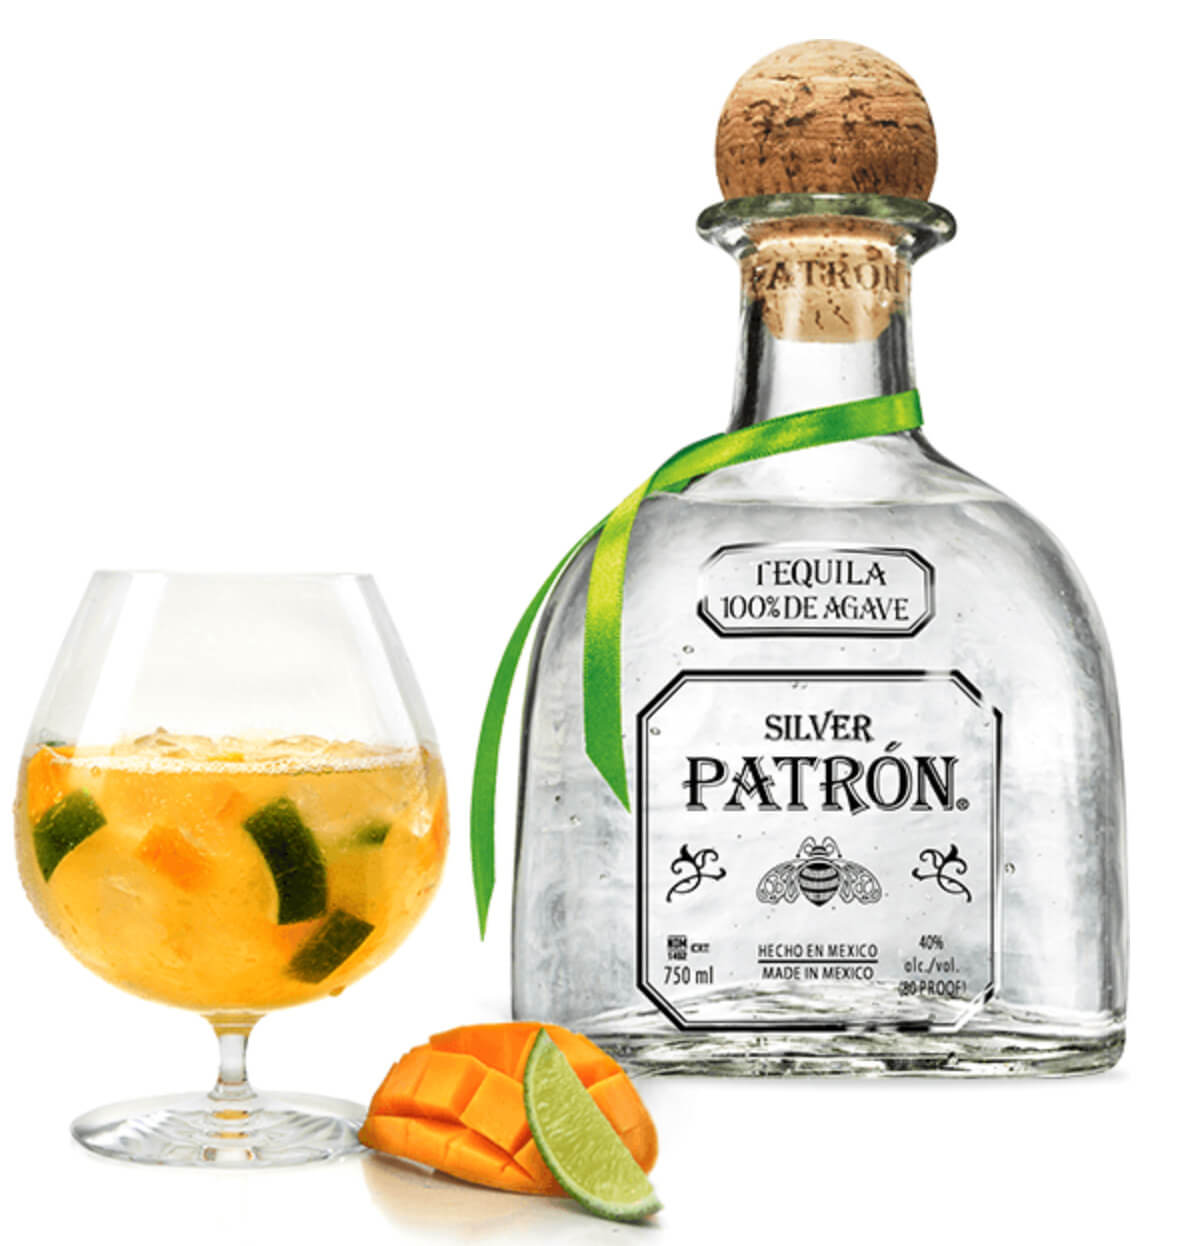 Patron Anejo Tequila: Quantity And Quality Are Not Mutually Exclusive